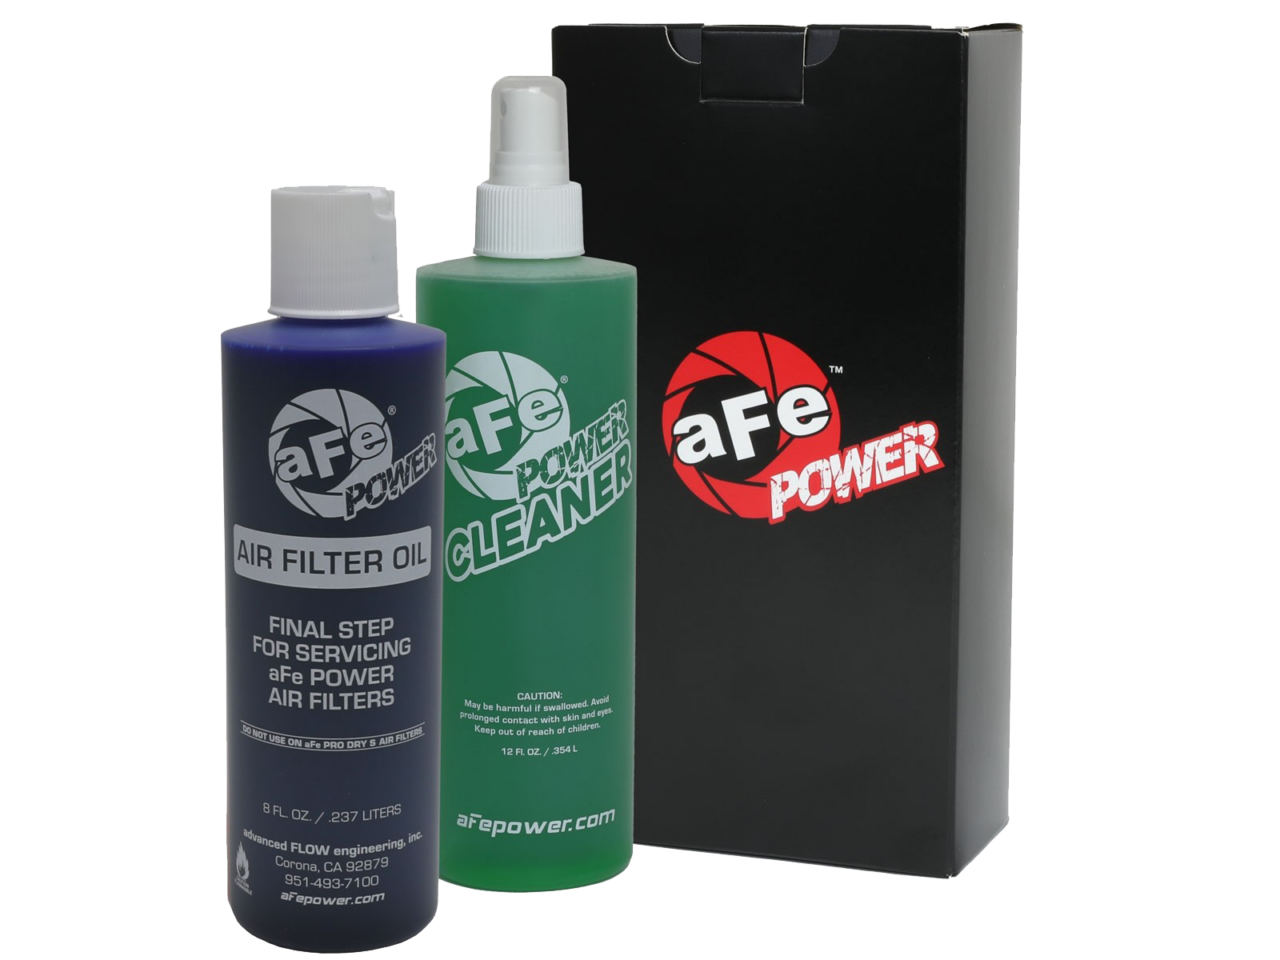 Product image of restoration kit for aFe air filters including cleaner and blue oil